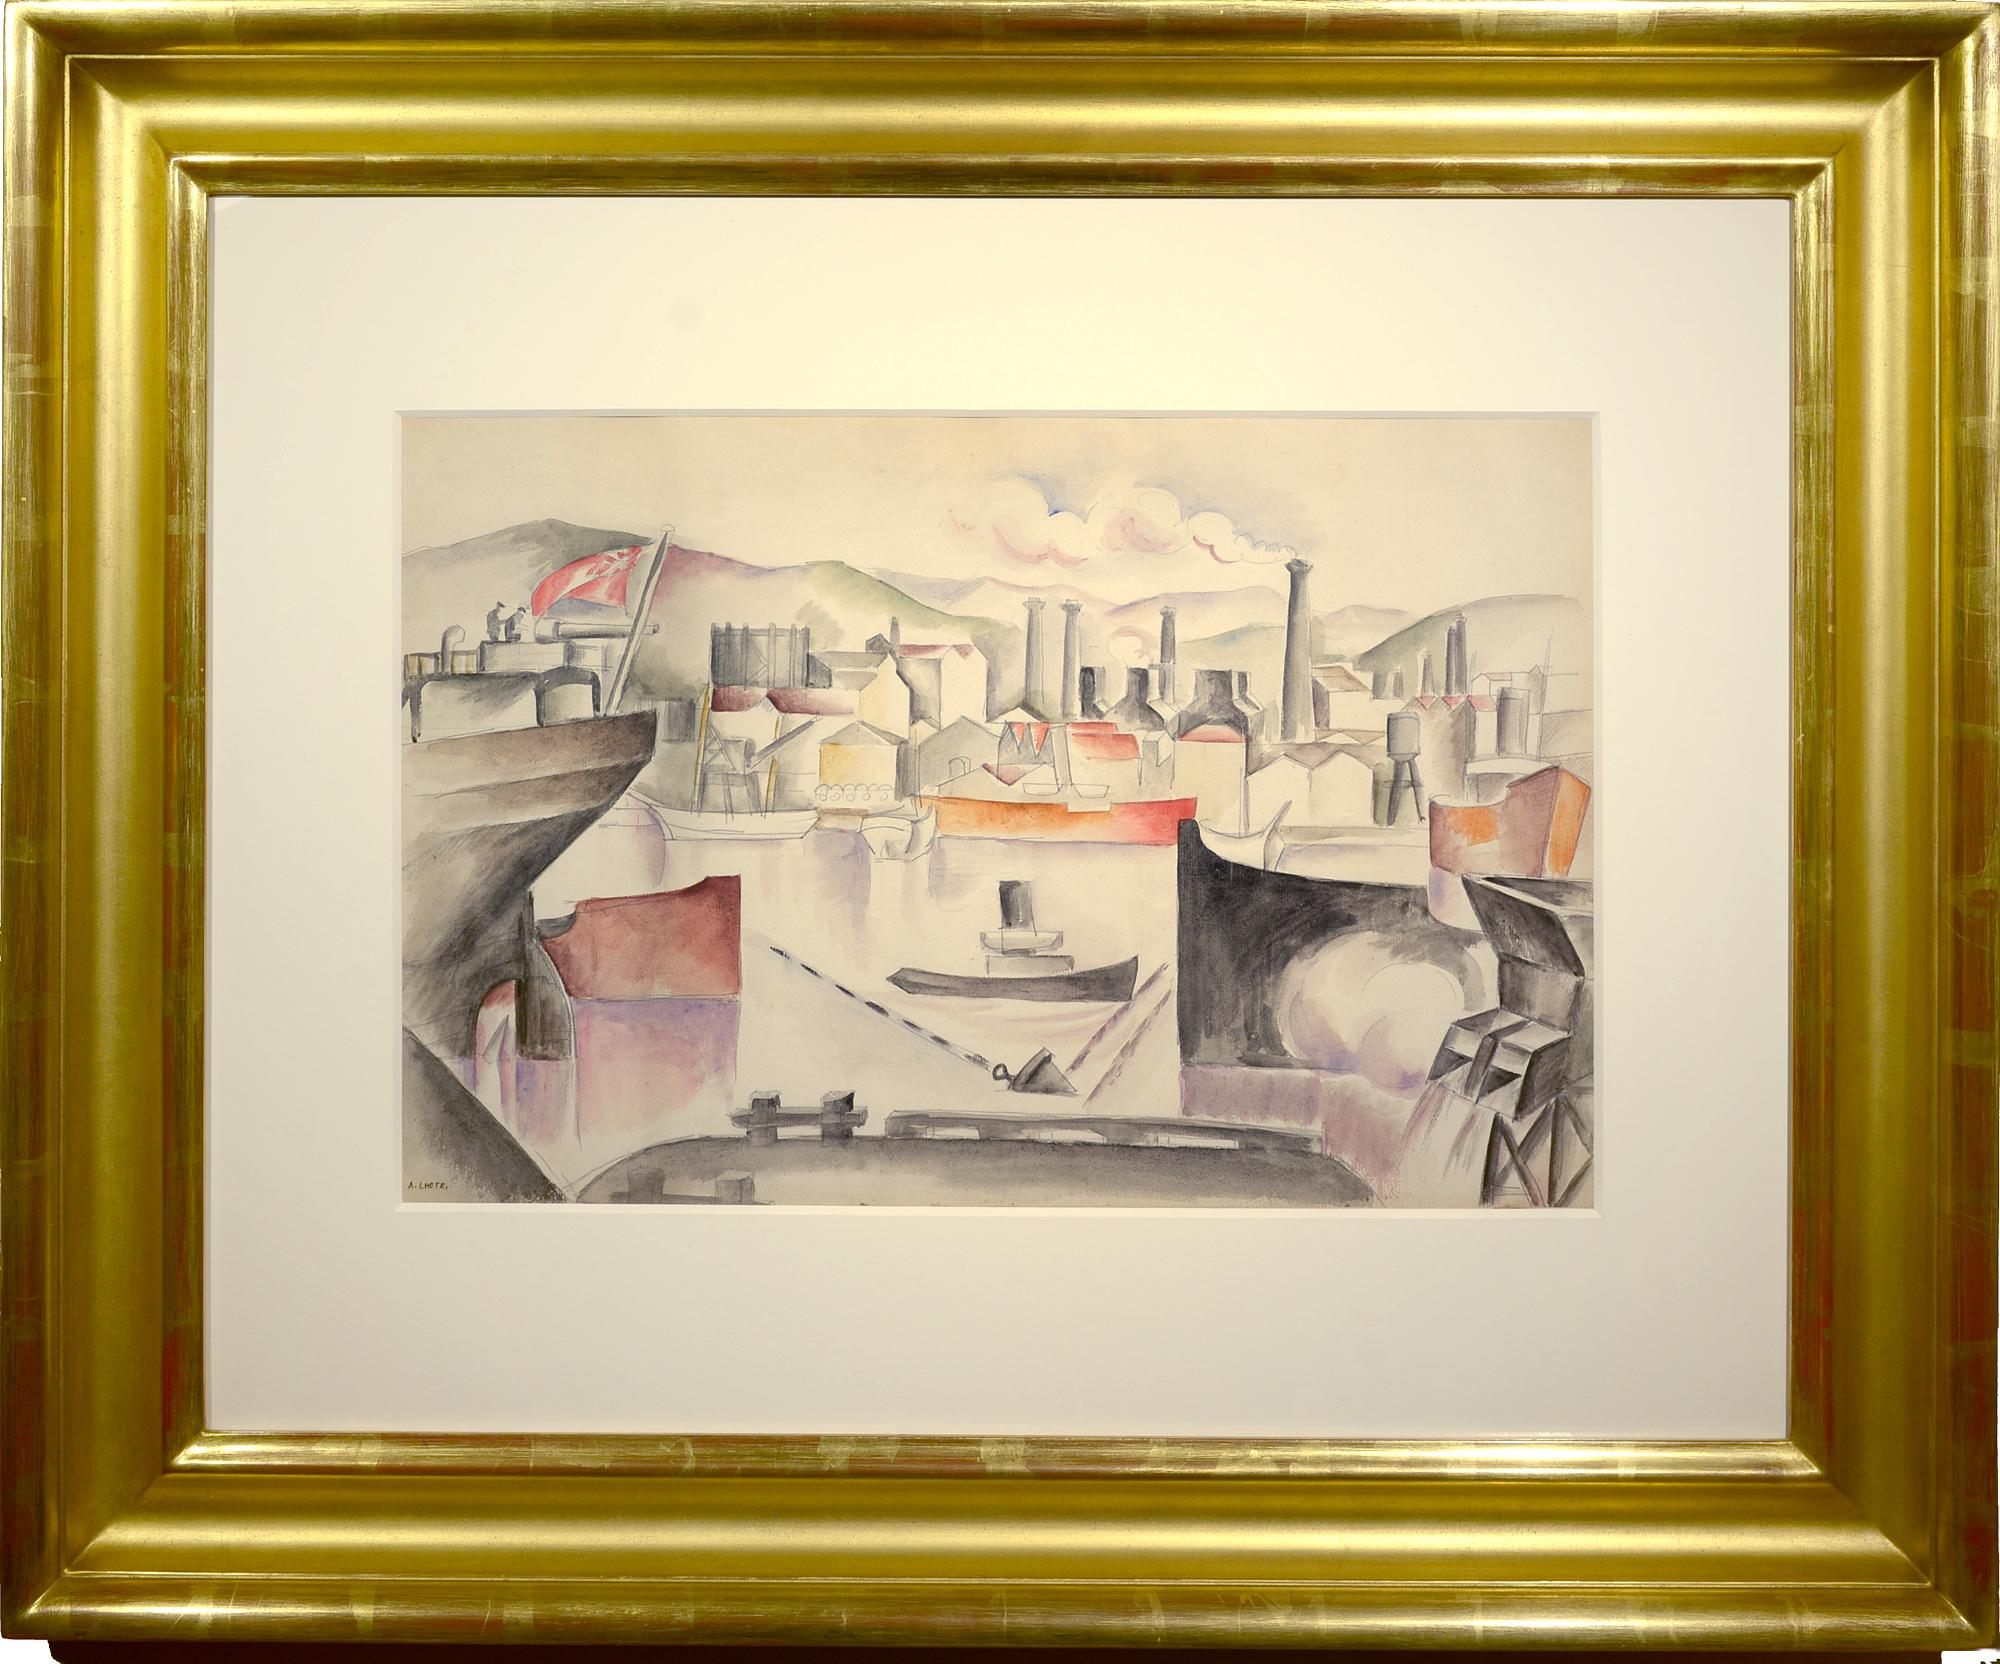 Harborfront, ca. 1915-1917, Important French Cubist Modernist Watercolor, City - Painting by André Lhote